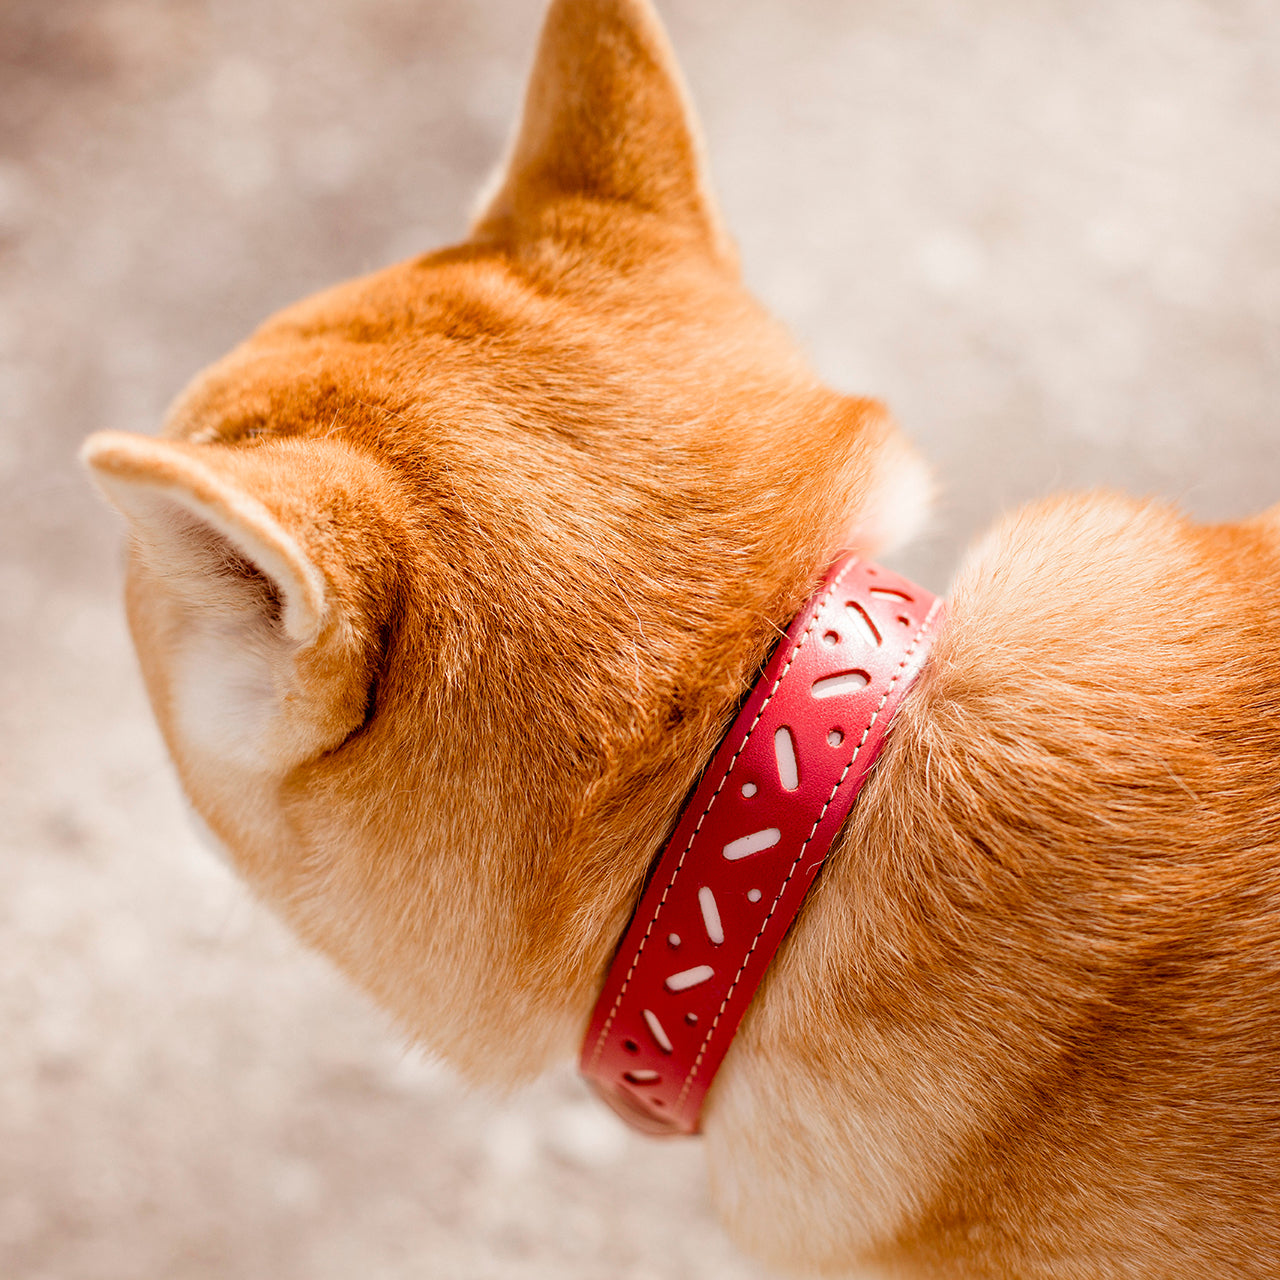 Limited edition New Bauhaus collar for dogs with shorter neck